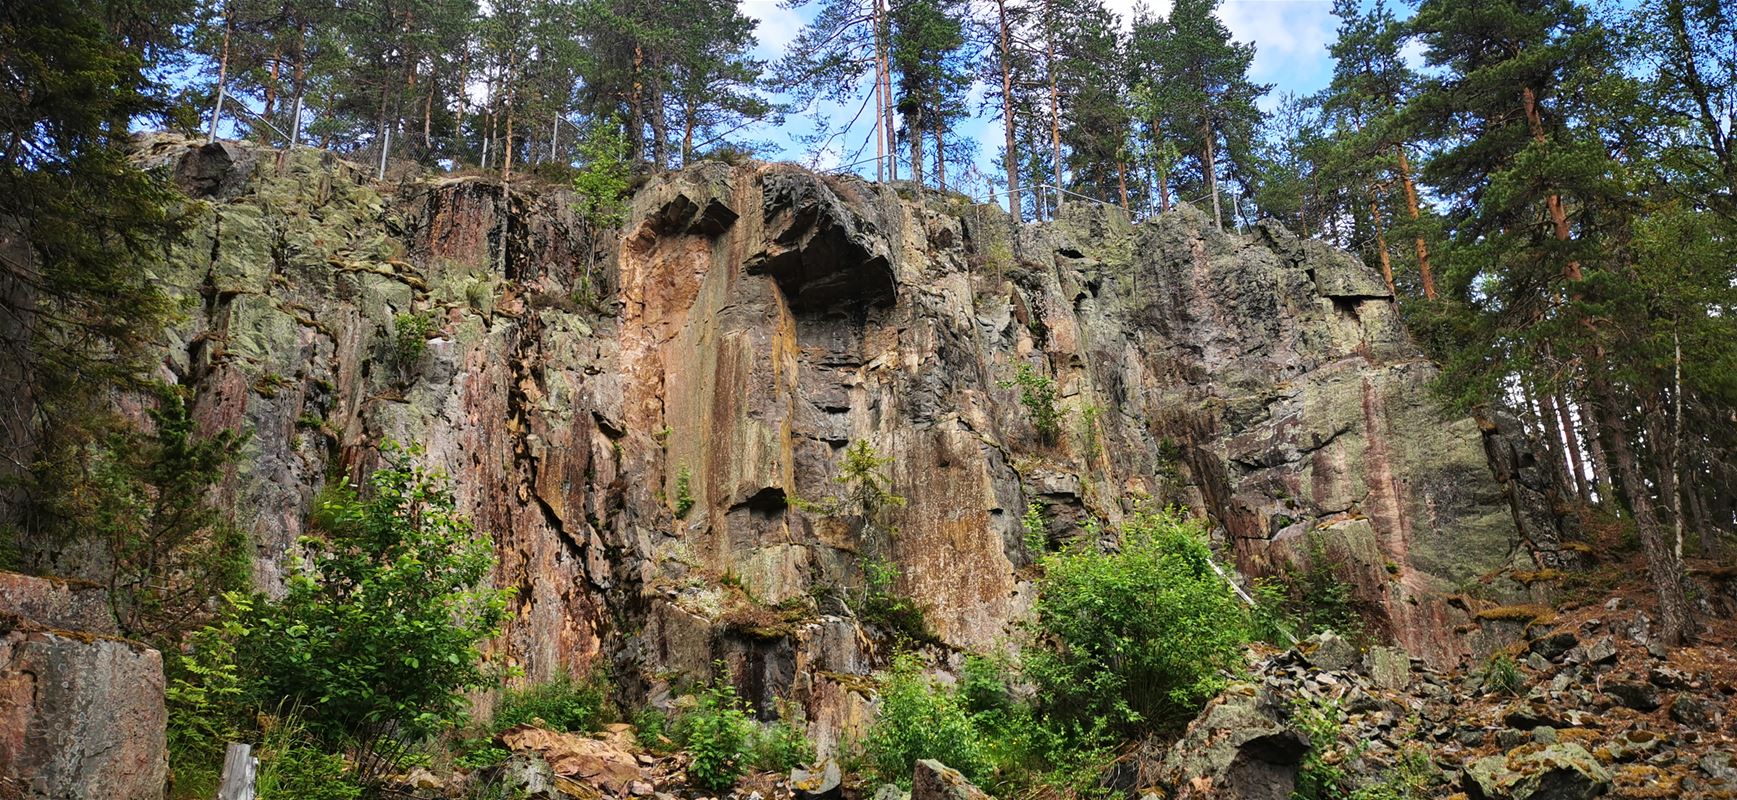 Cliff in forest.